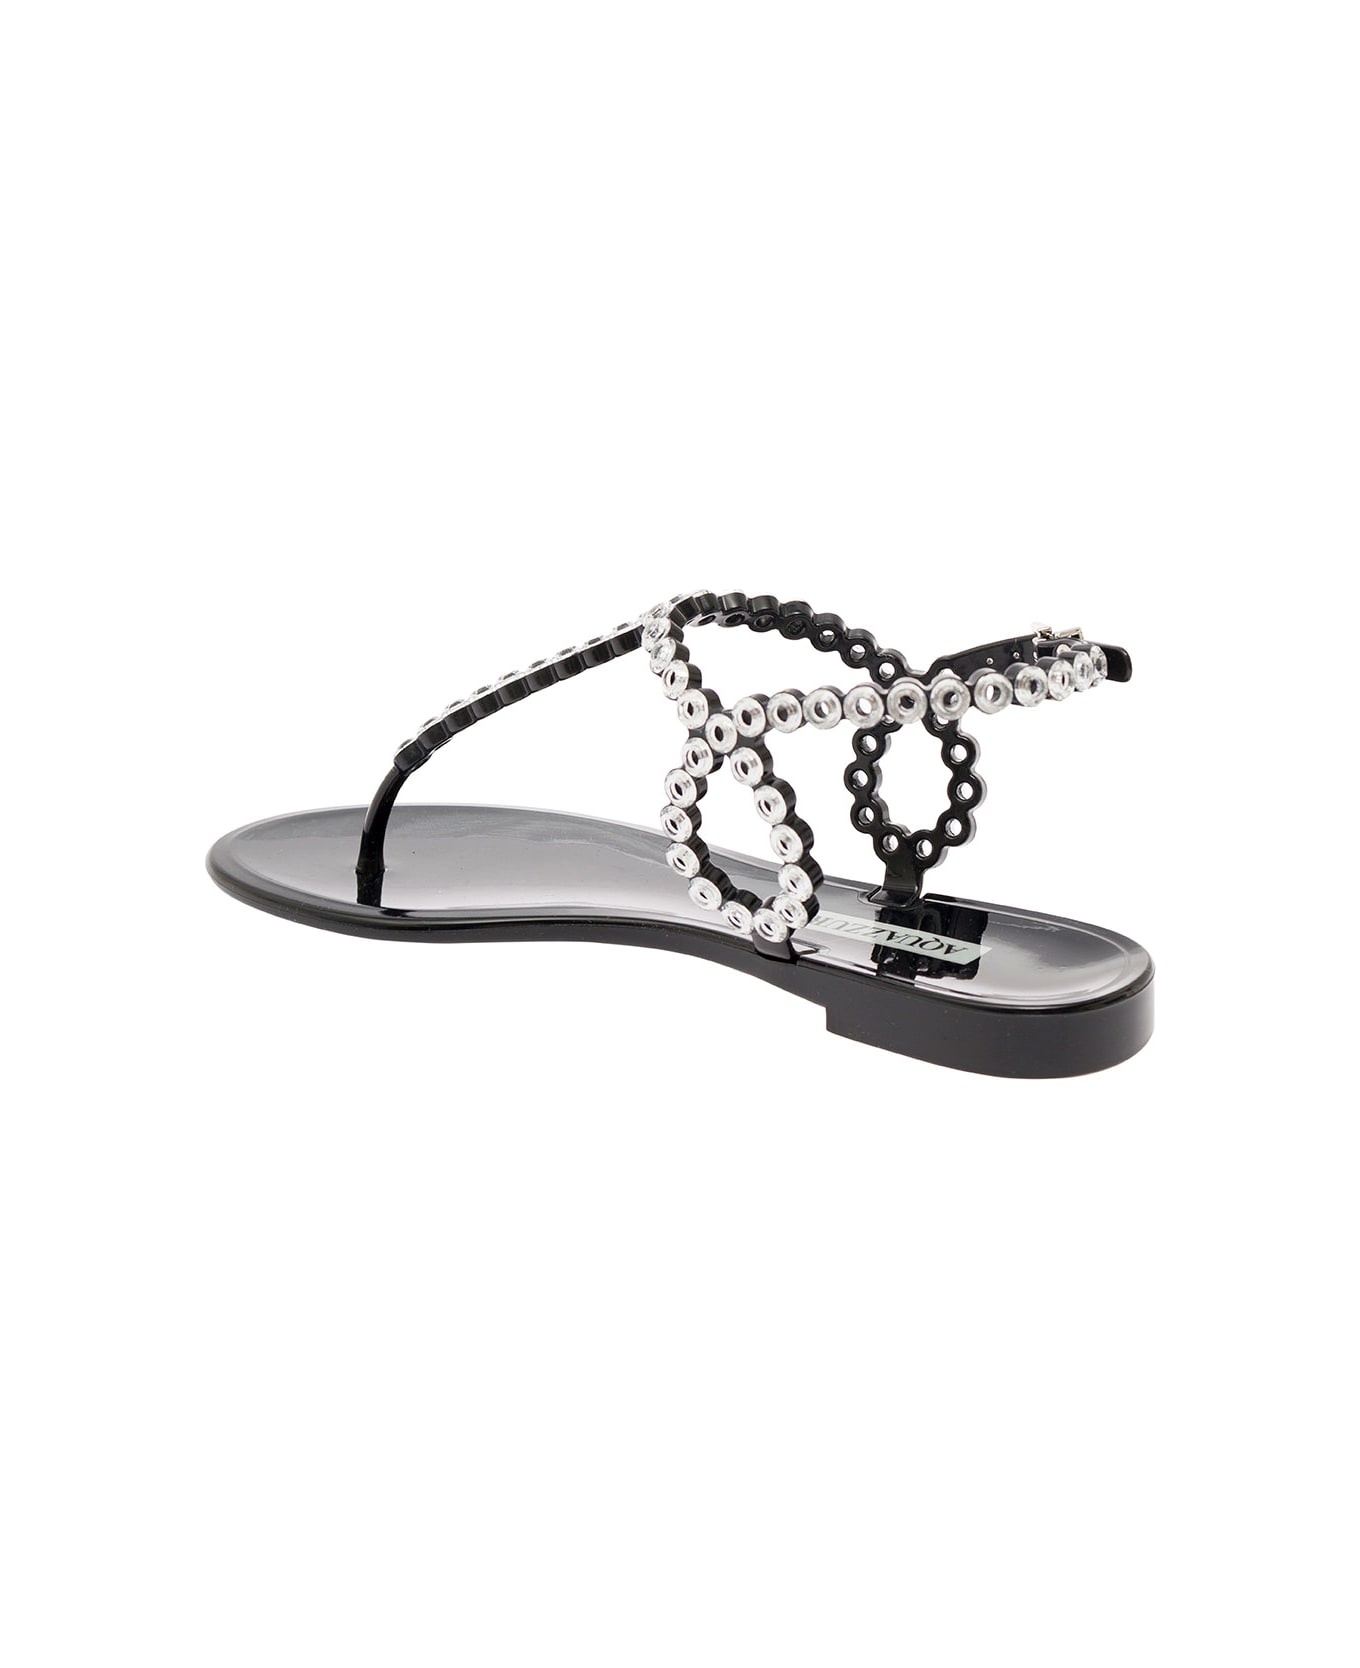 Almost Bare Crystal Jelly Sandal Flat - 3